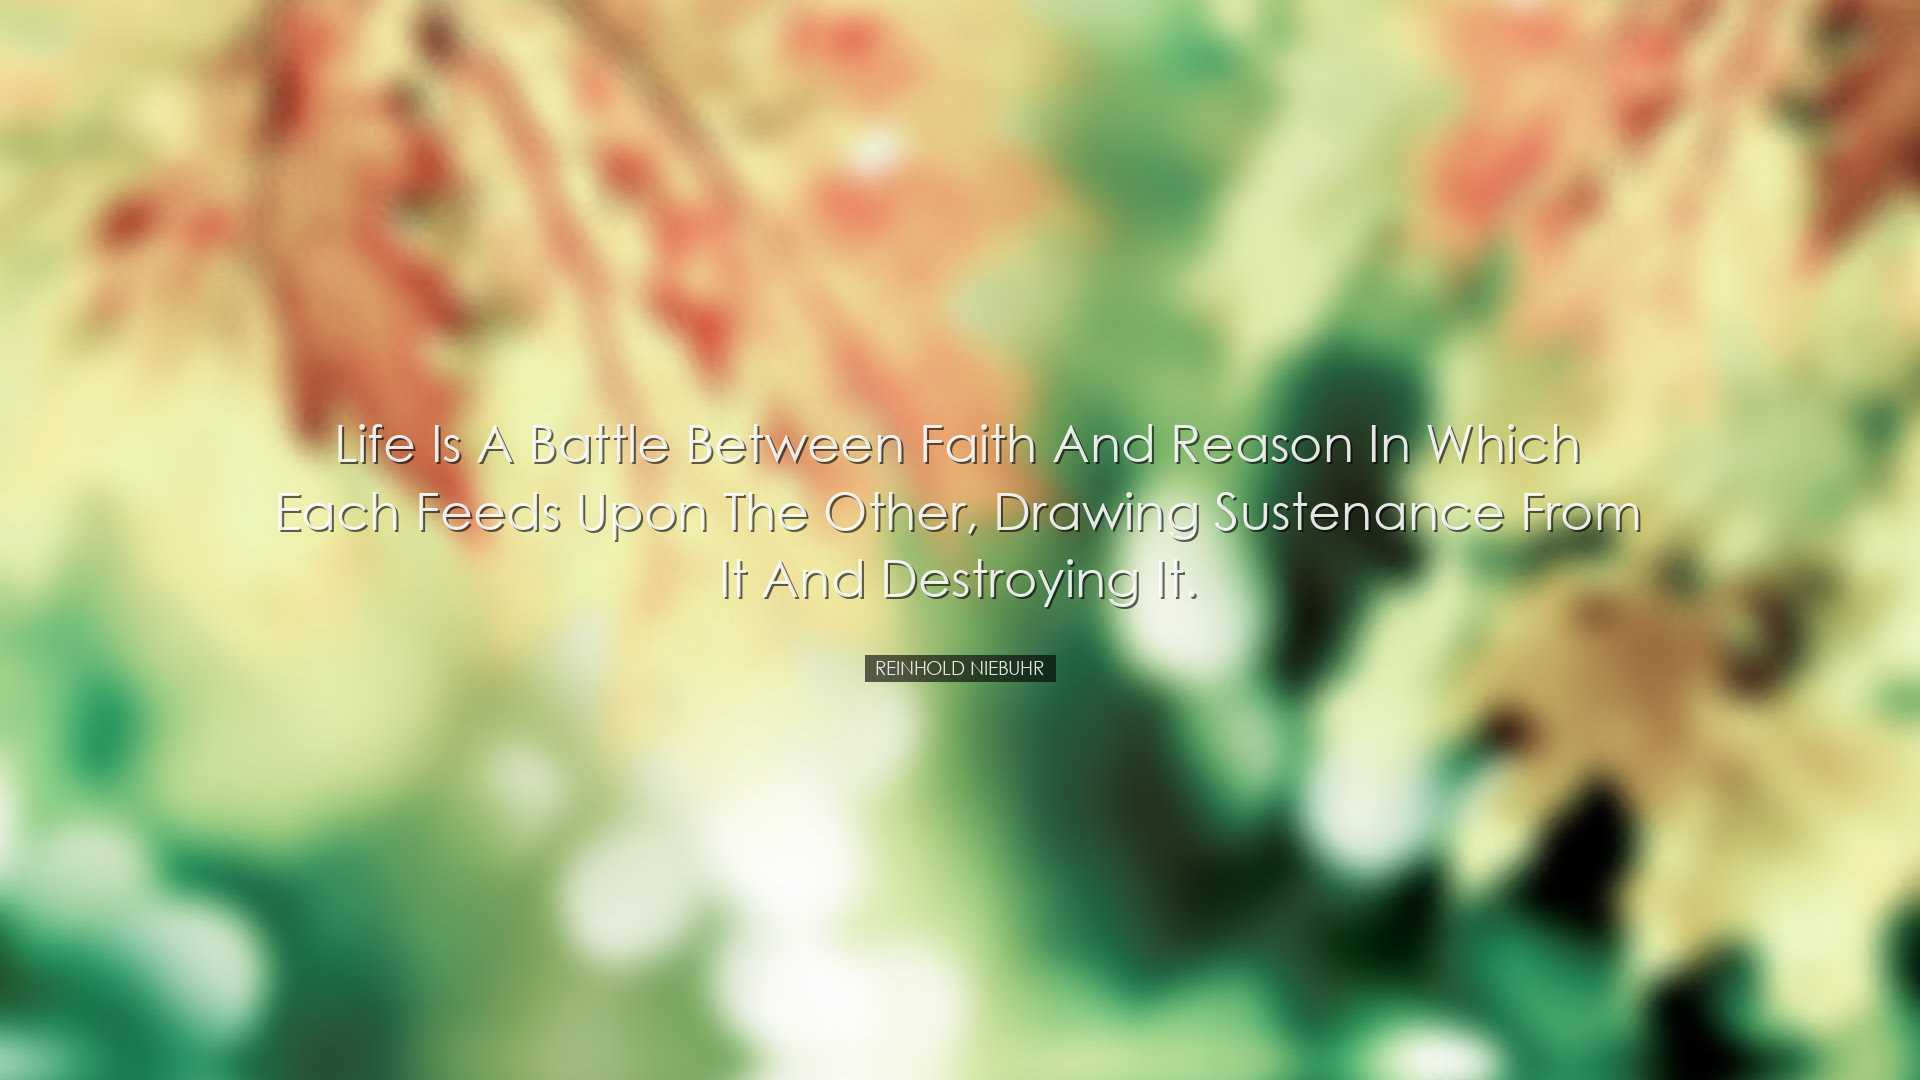 Life is a battle between faith and reason in which each feeds upon